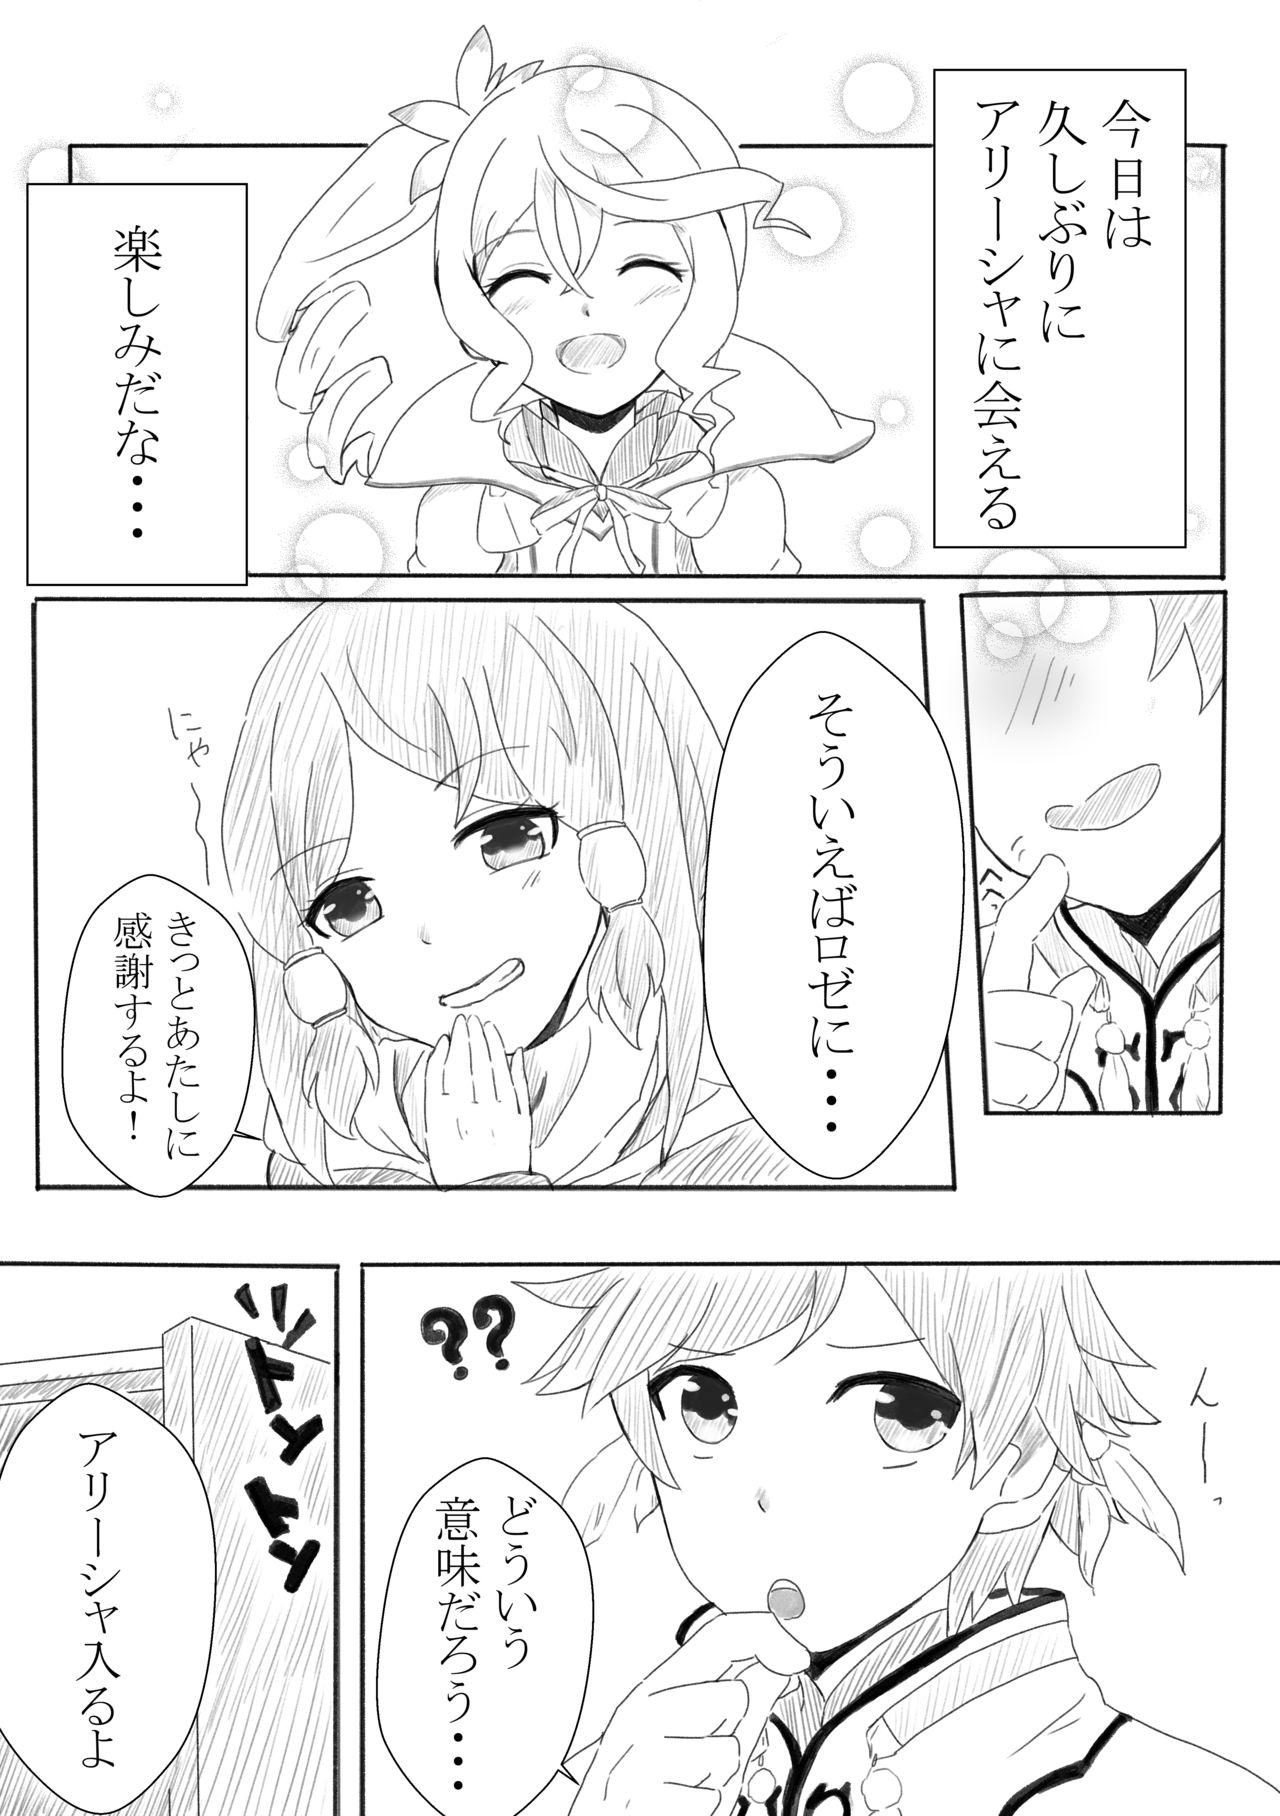 Sapphicerotica アリーシャで癒して？ - Tales of zestiria Com - Page 2